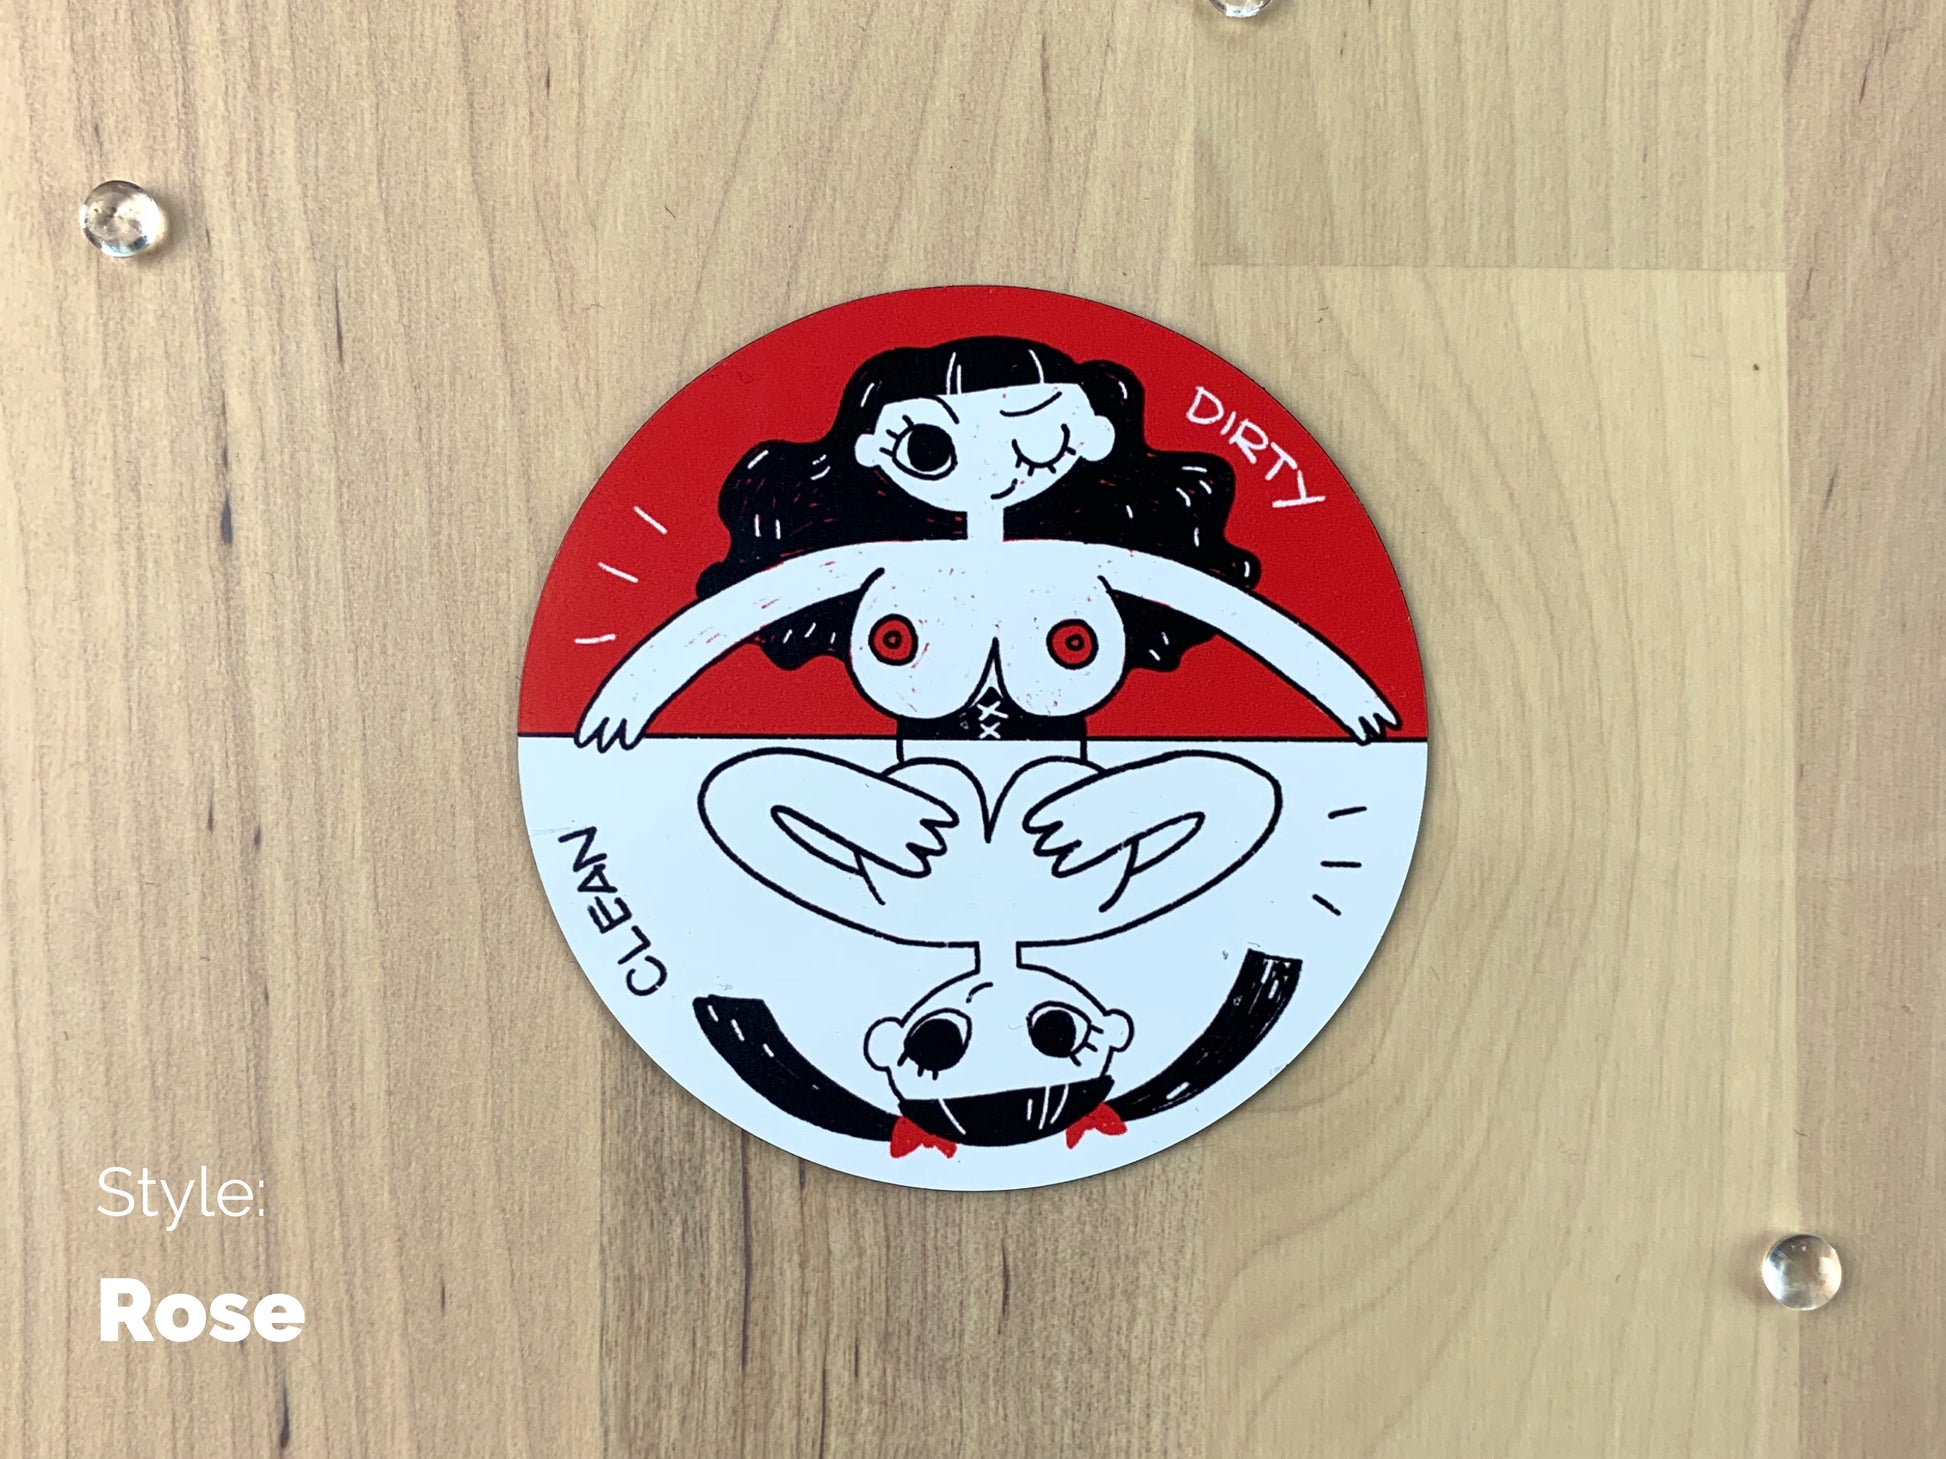 A circular sheet magnet with a sassy illustration of a lady with her top off on the dirty half, and covering her boobies on the bottom half.